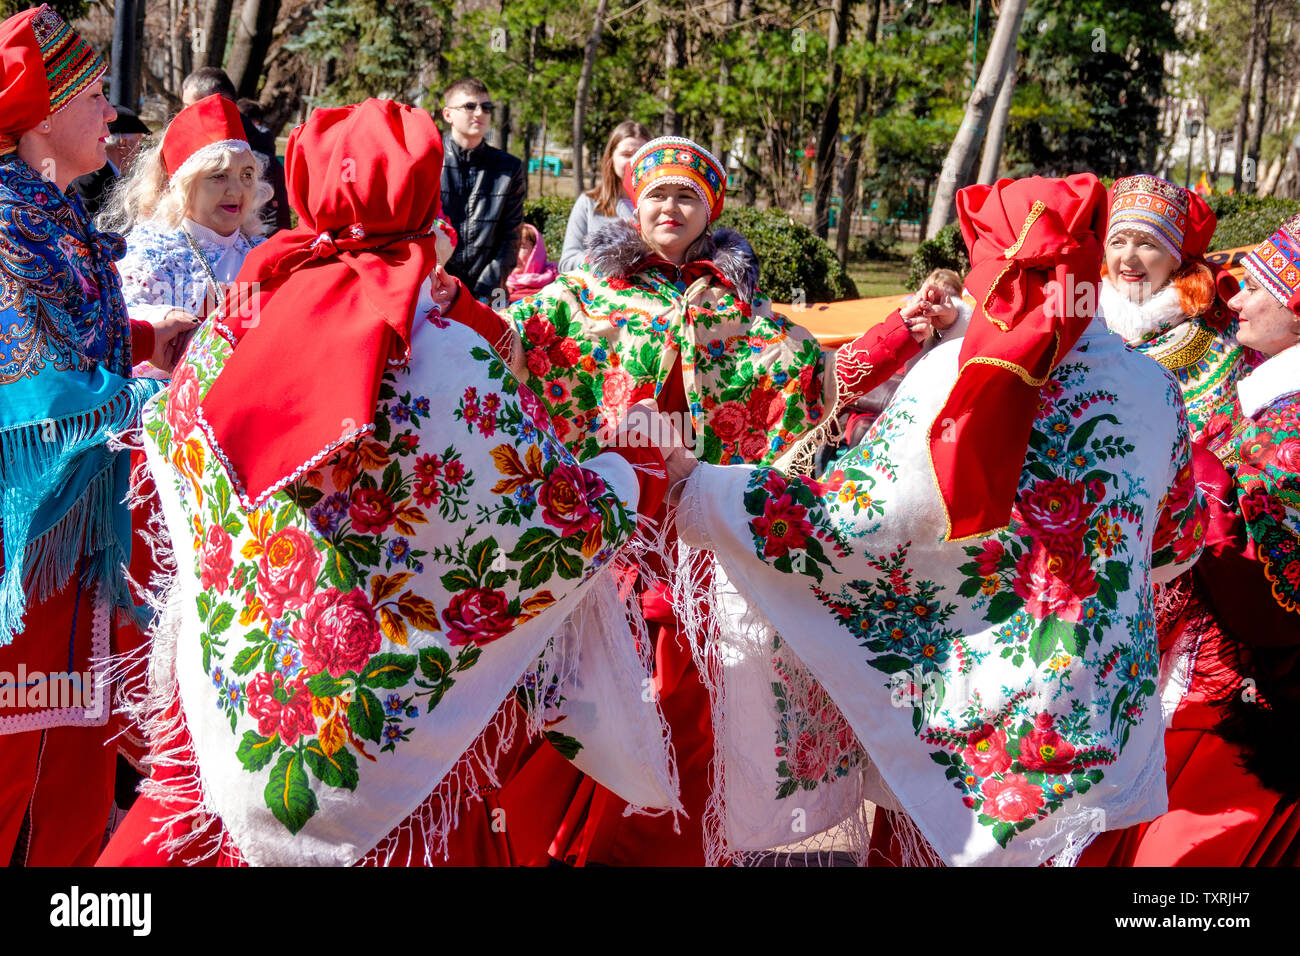 Dancers in traditional Moldovan dress dance during the festival of Maslenitsa, an eastern slavic religious and folk holiday, in Chișinău, Moldova Stock Photo